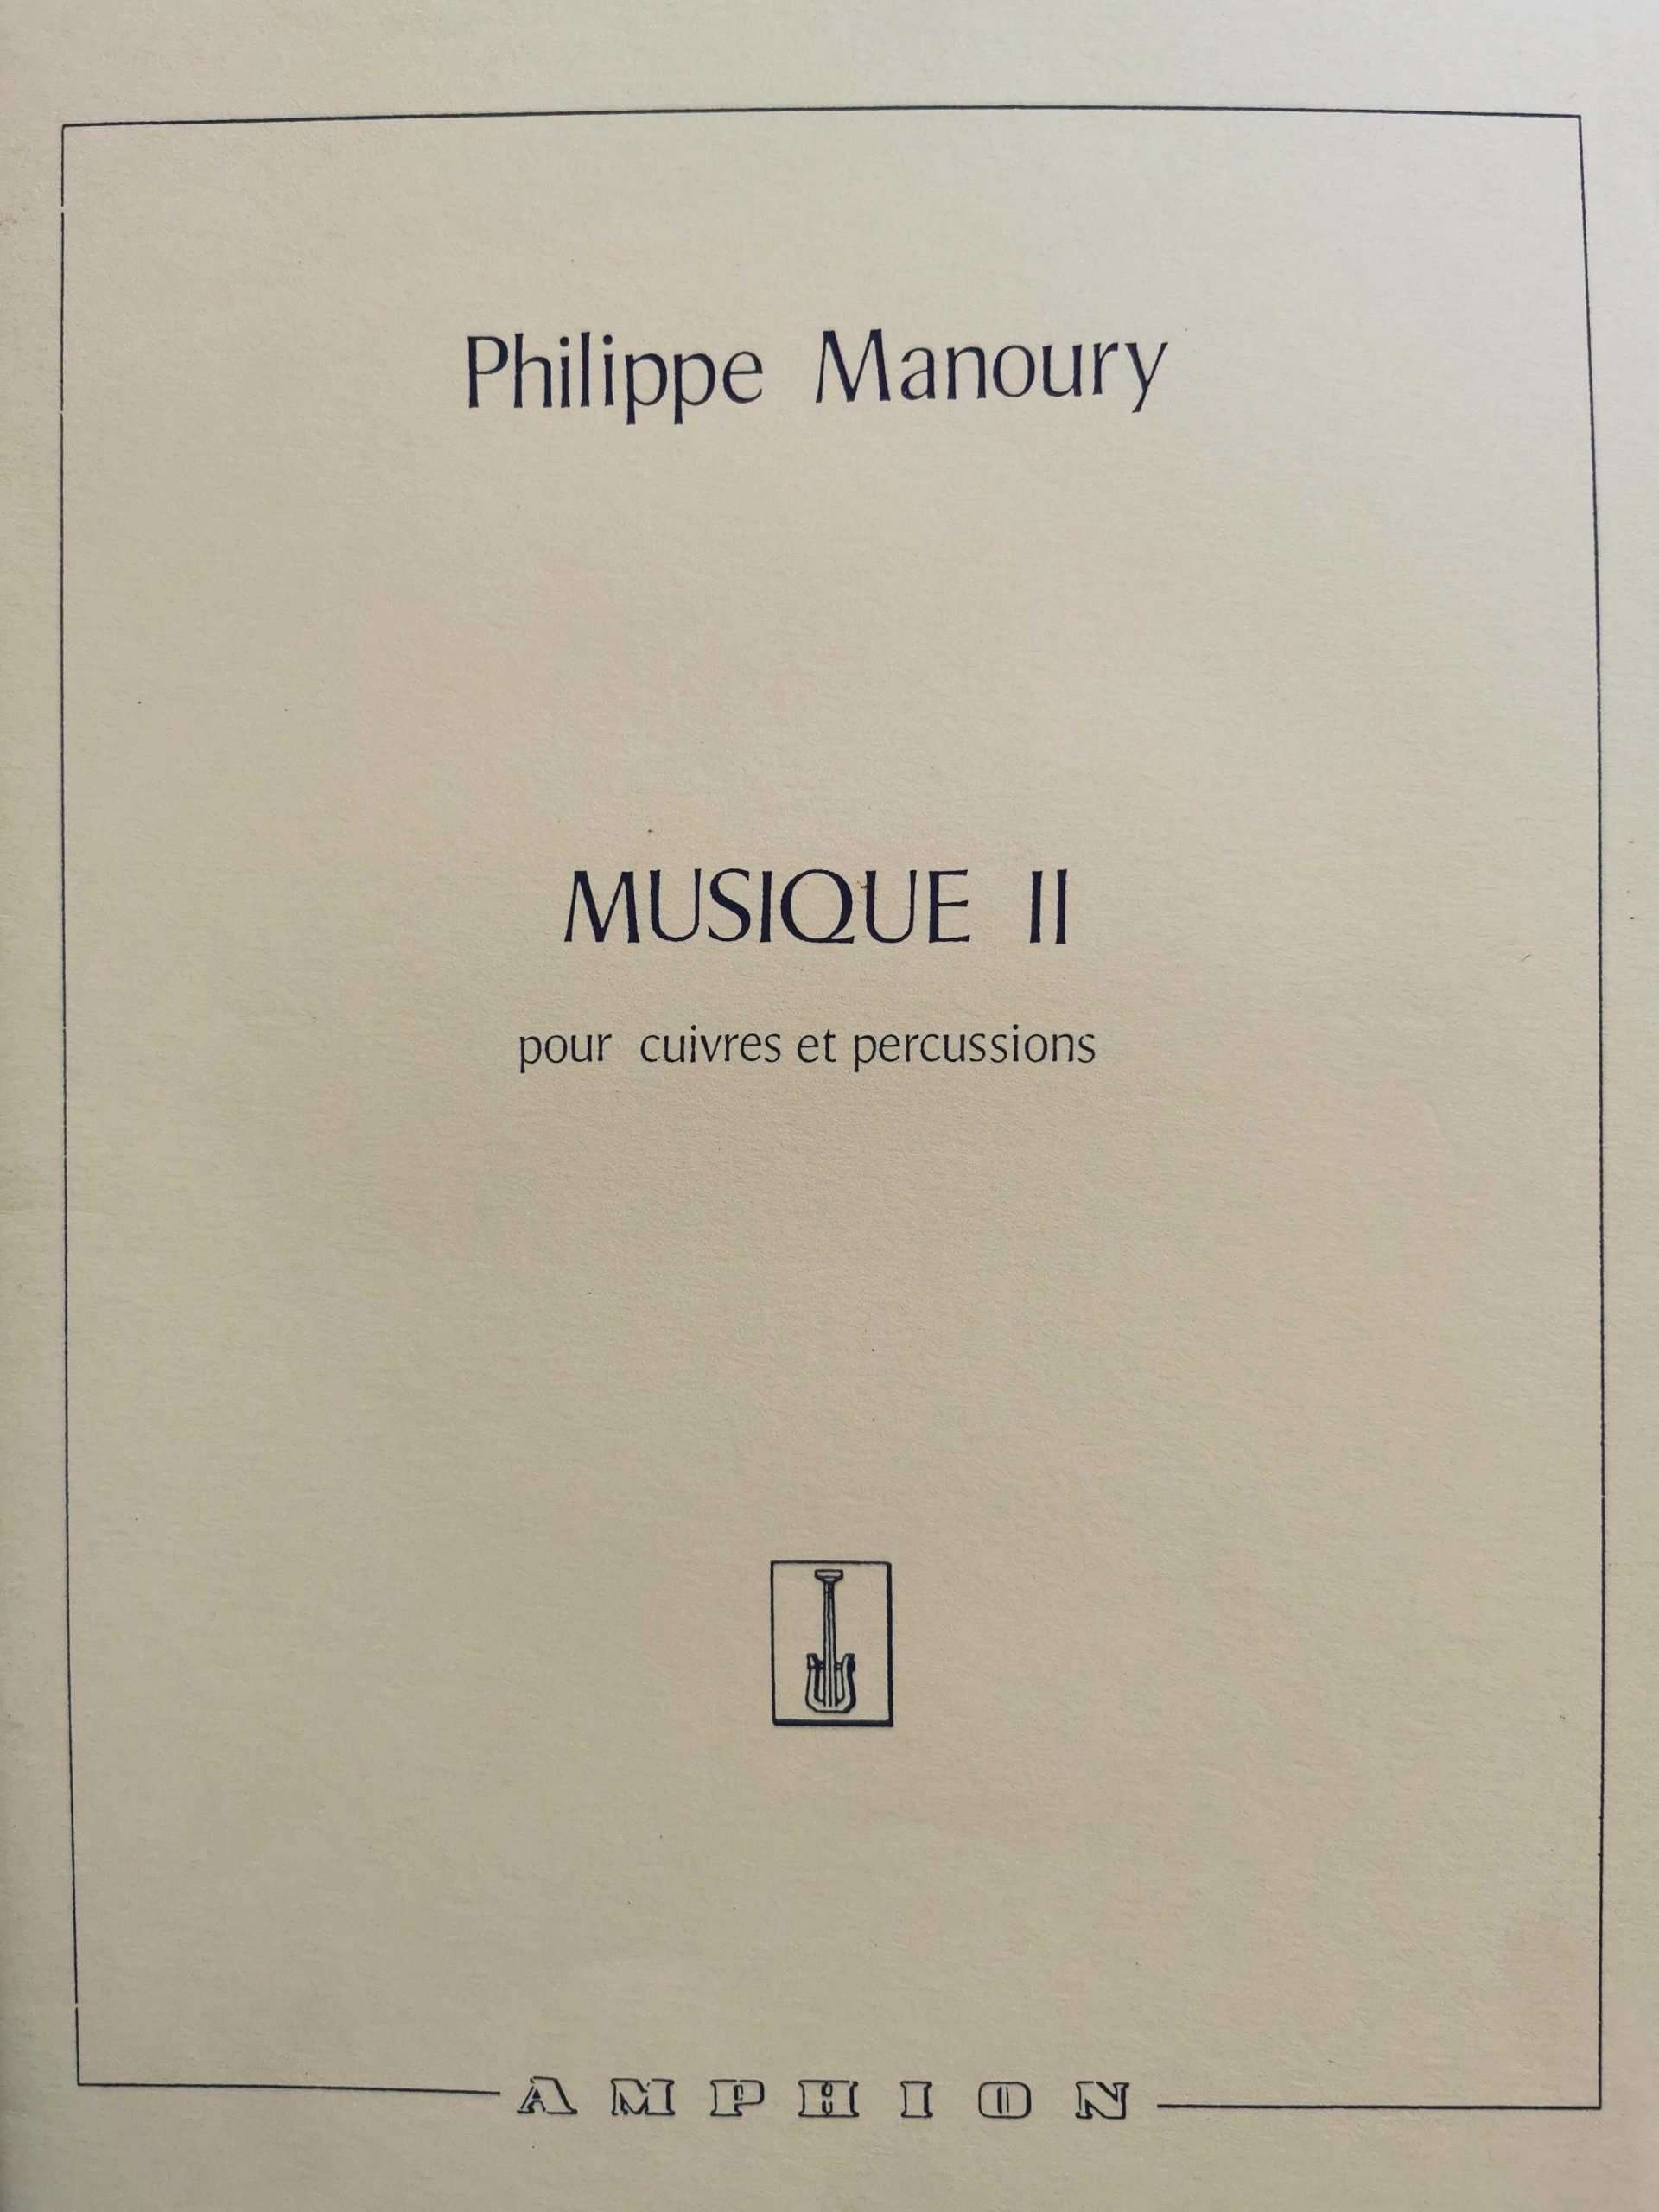 Musique II by Philippe Manoury